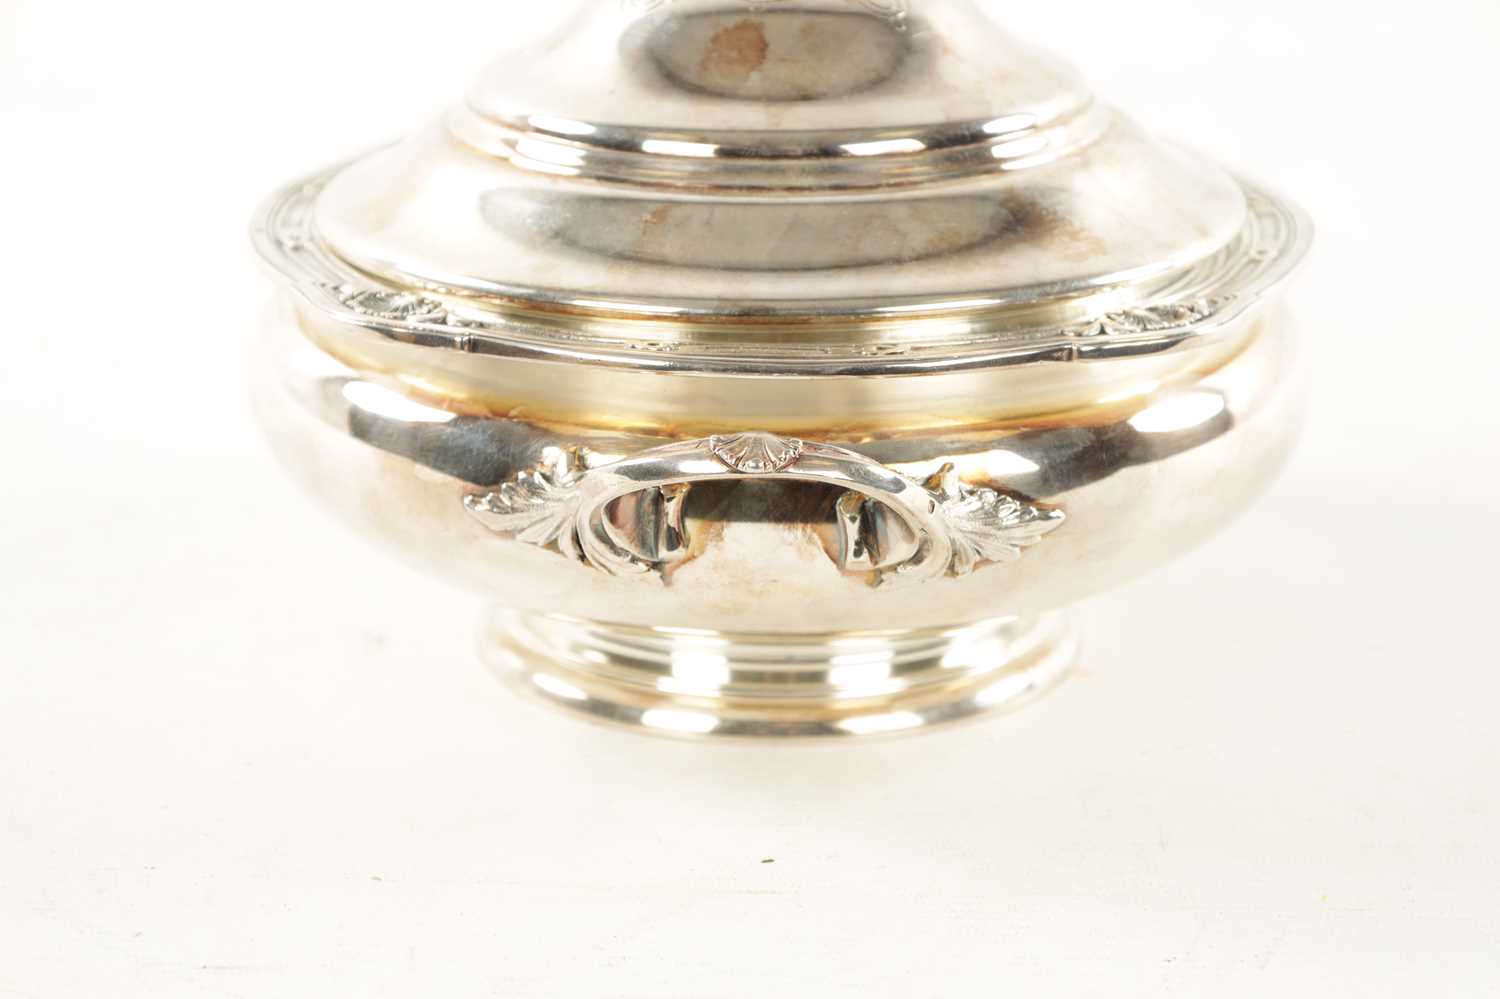 A 19TH CENTURY CONTINENTAL SILVER TWO-HANDLED LIDDED VEGETABLE DISH - Image 7 of 11